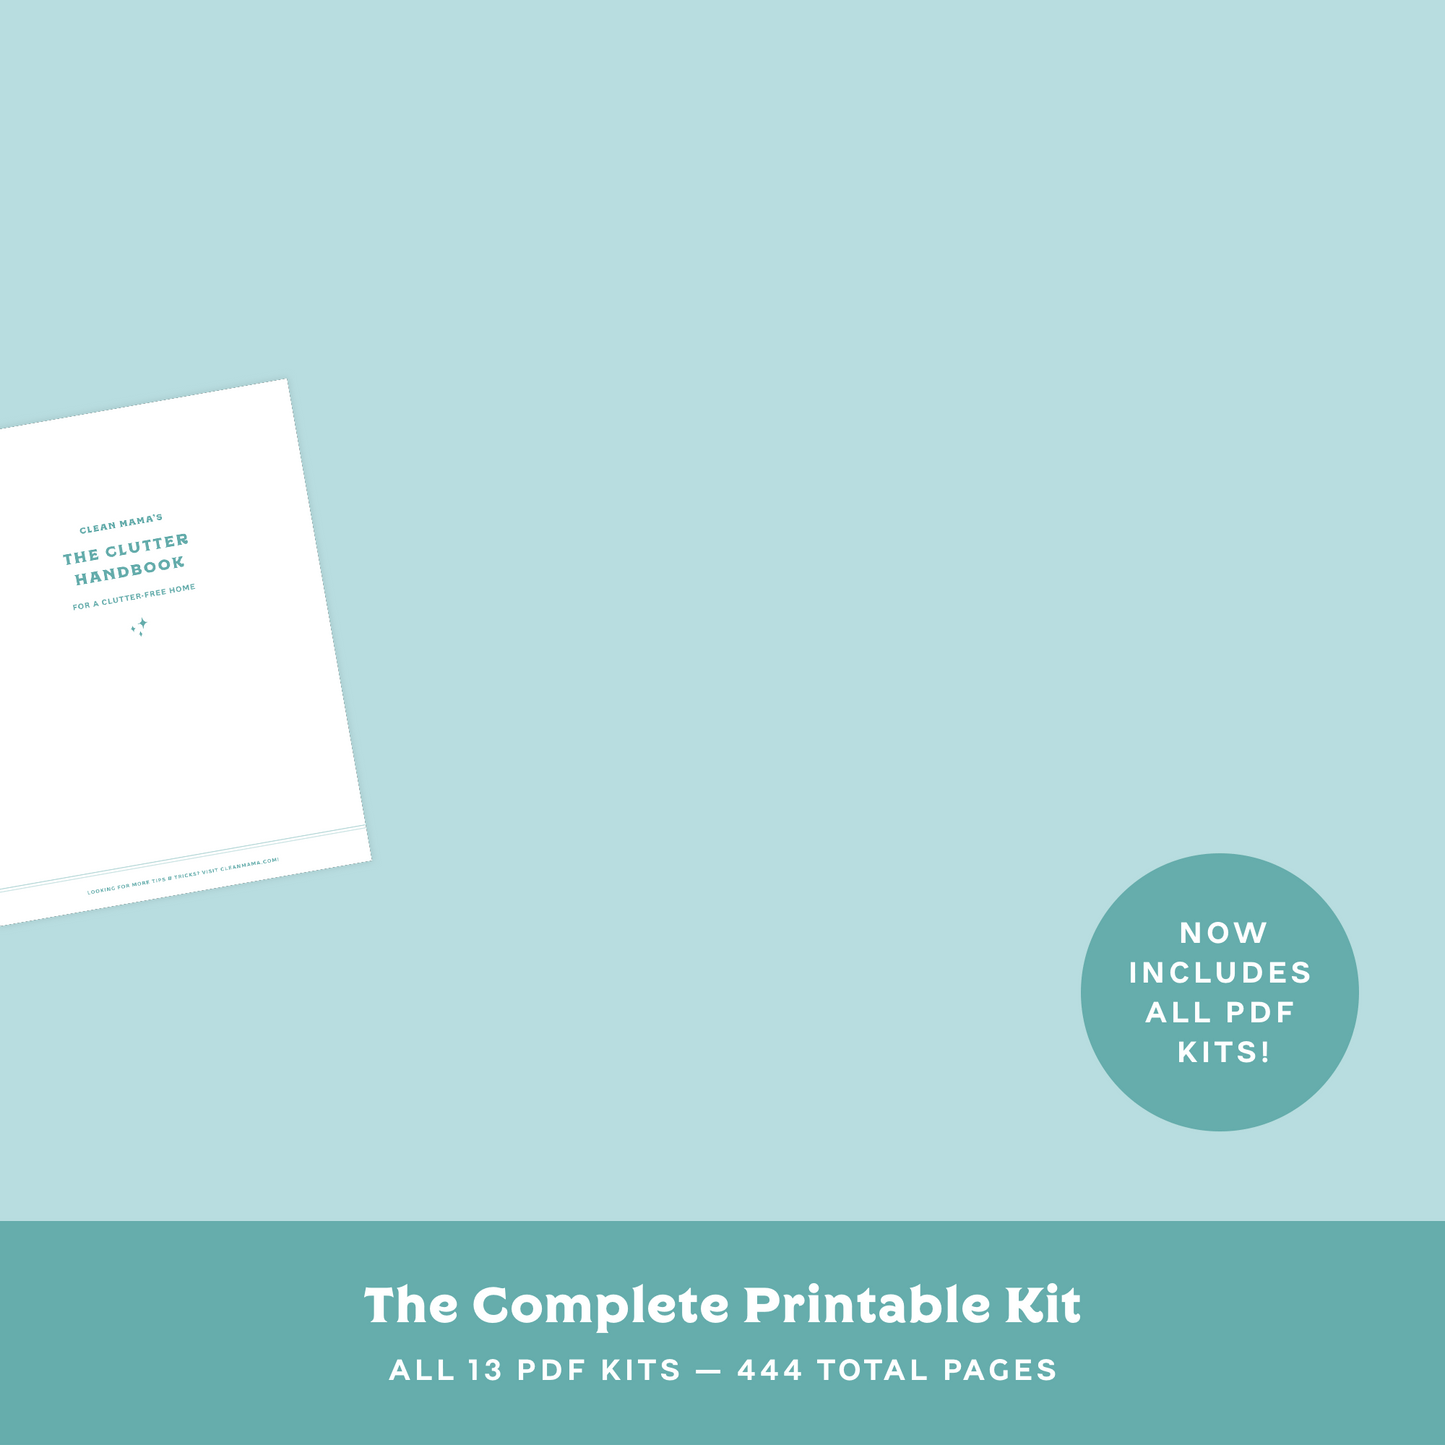 The Complete Clean Mama Printable Bundle